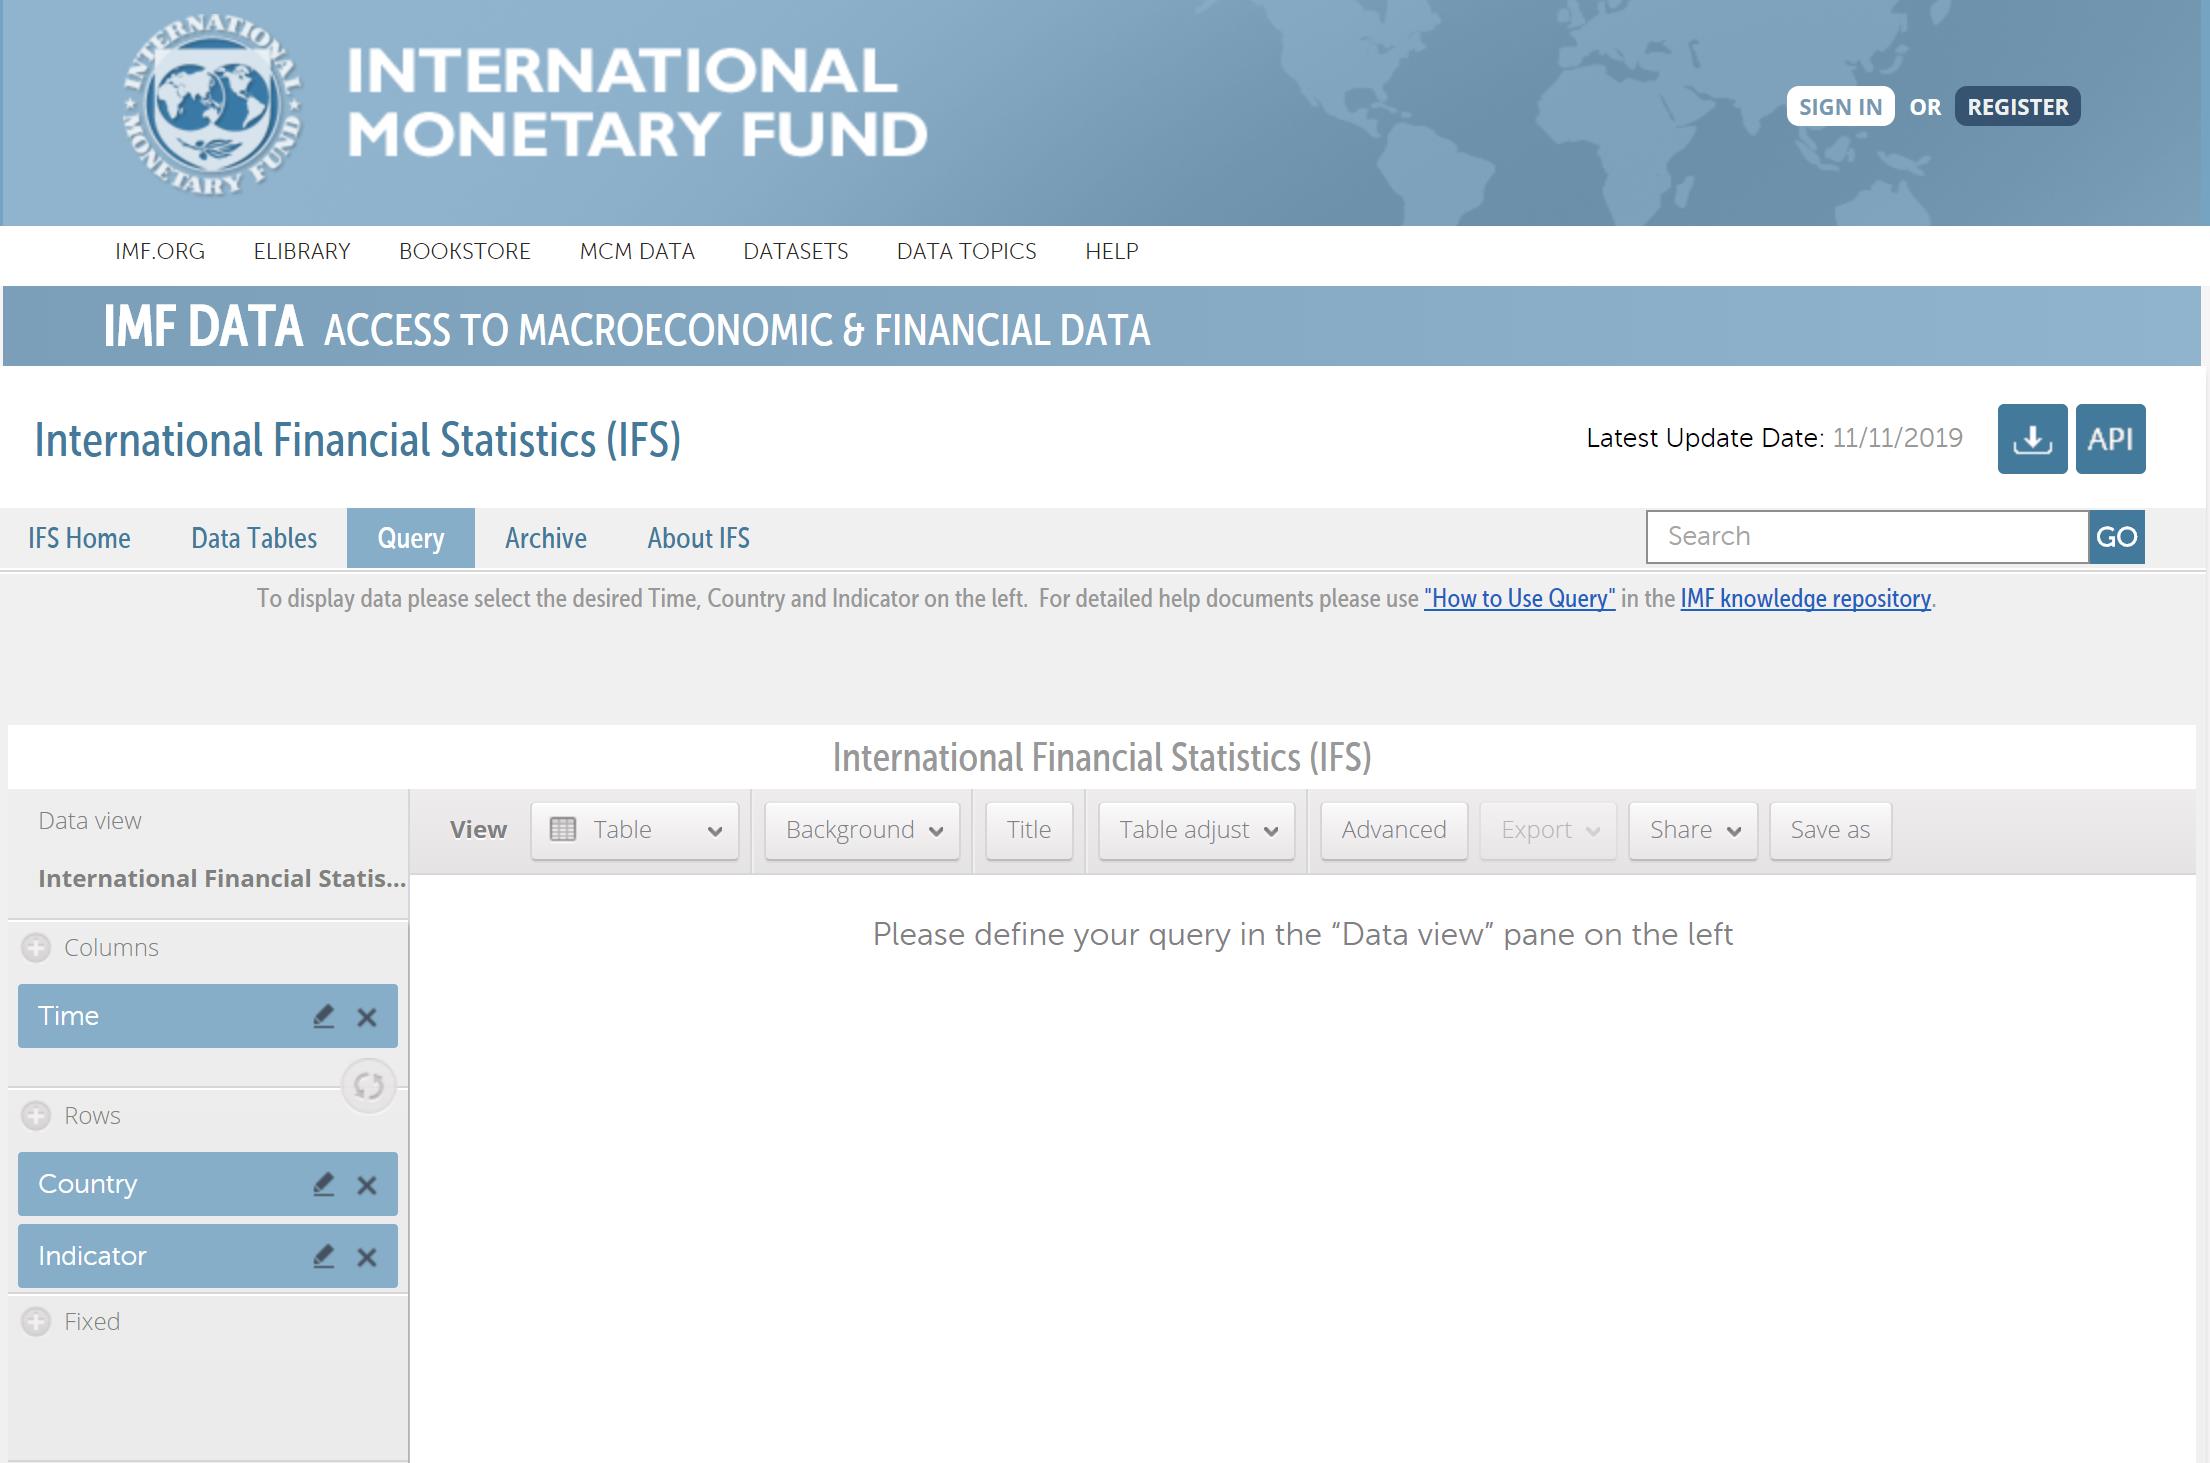 Screenshot of the International Financial Statistics main page. On the left, there are three filters, Time, Country, and Indicator, from top to bottom. The right part is empty and is for displaying outcome once the filters are selected.